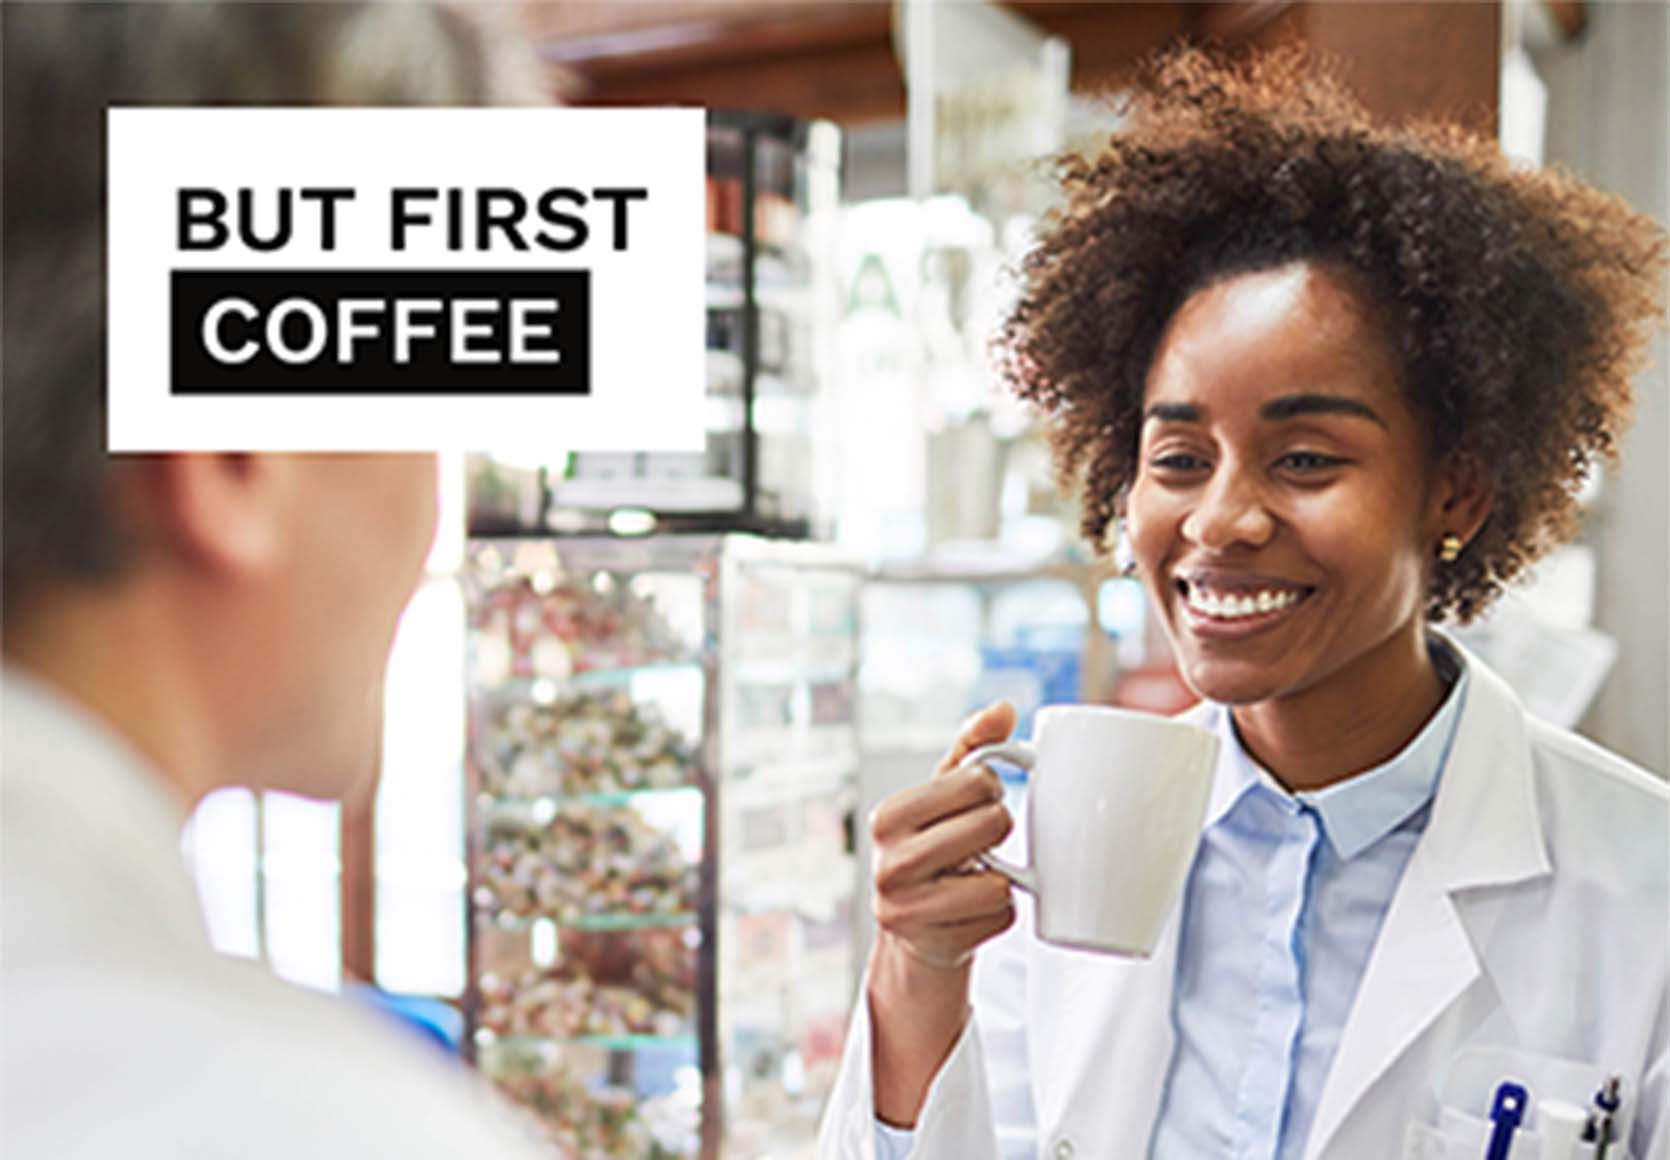 pharmacist is enjoying cup of coffee thanks to the pharmacy robot